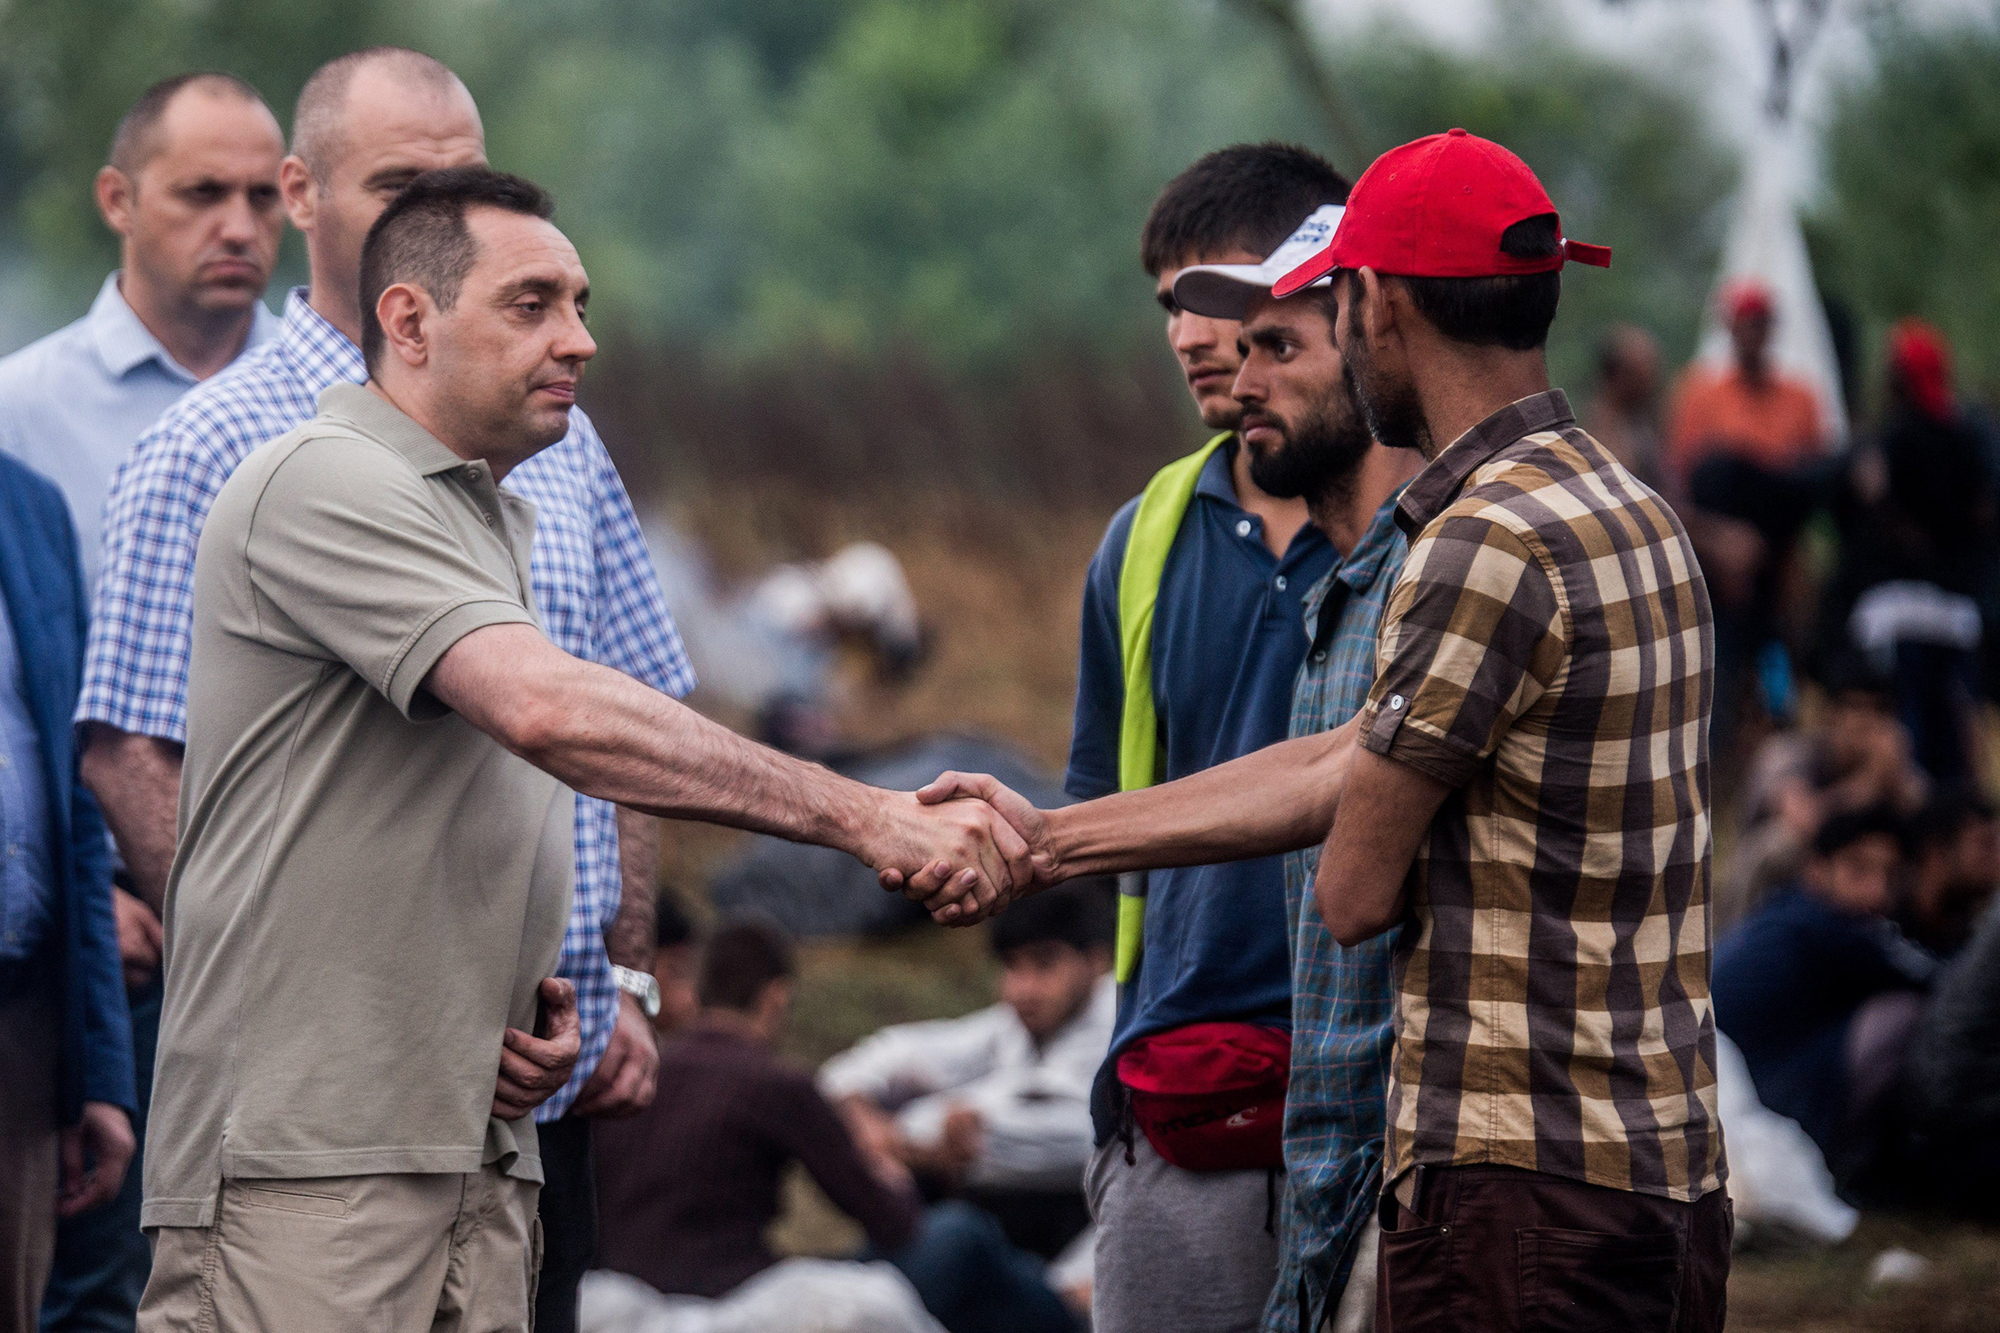 Serbian Minister of Social Affairs Aleksandar Vulin, left, shakes hands with migrants who are on hunger strike in an effort to put pressure on the Hungarian government to open the national border, sit at the border between Serbia and Hungary at Horgos, Northern Serbia, Tuesday, July 26, 2016. There are around 1,400 migrants staying in Northern Serbia waiting for the opportunity to continue their journey to central Europe, but the border remains closed. (Zoltan Balogh/MTI via AP)